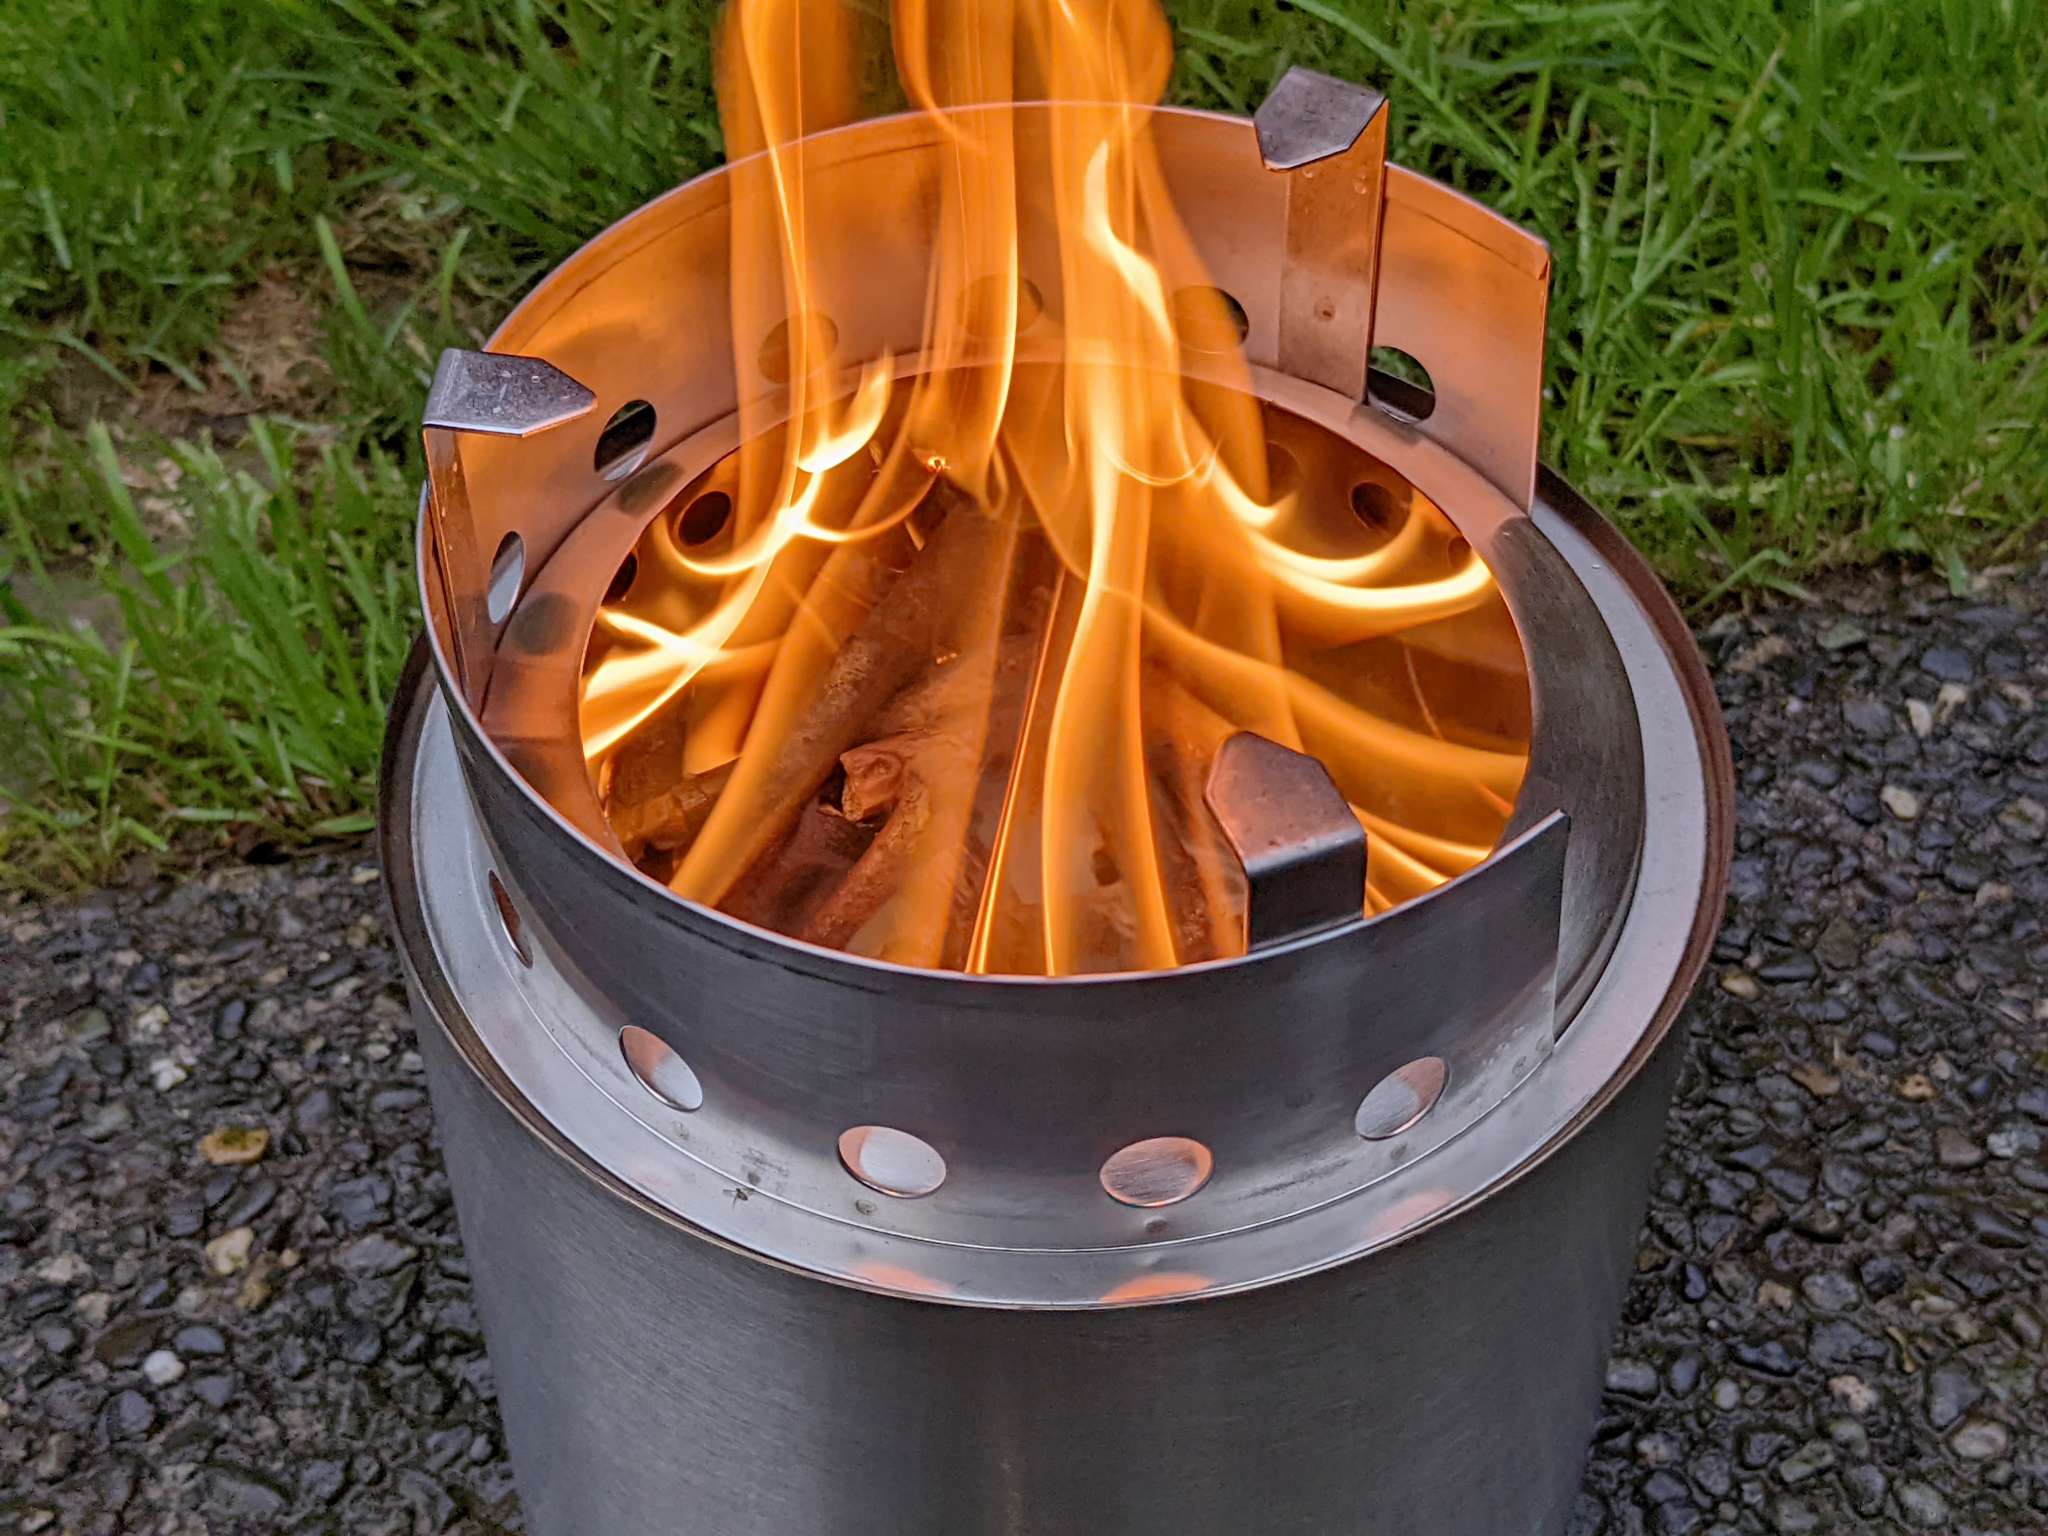 Solo Stove Campfire review - Bring the heat everywhere you go with this